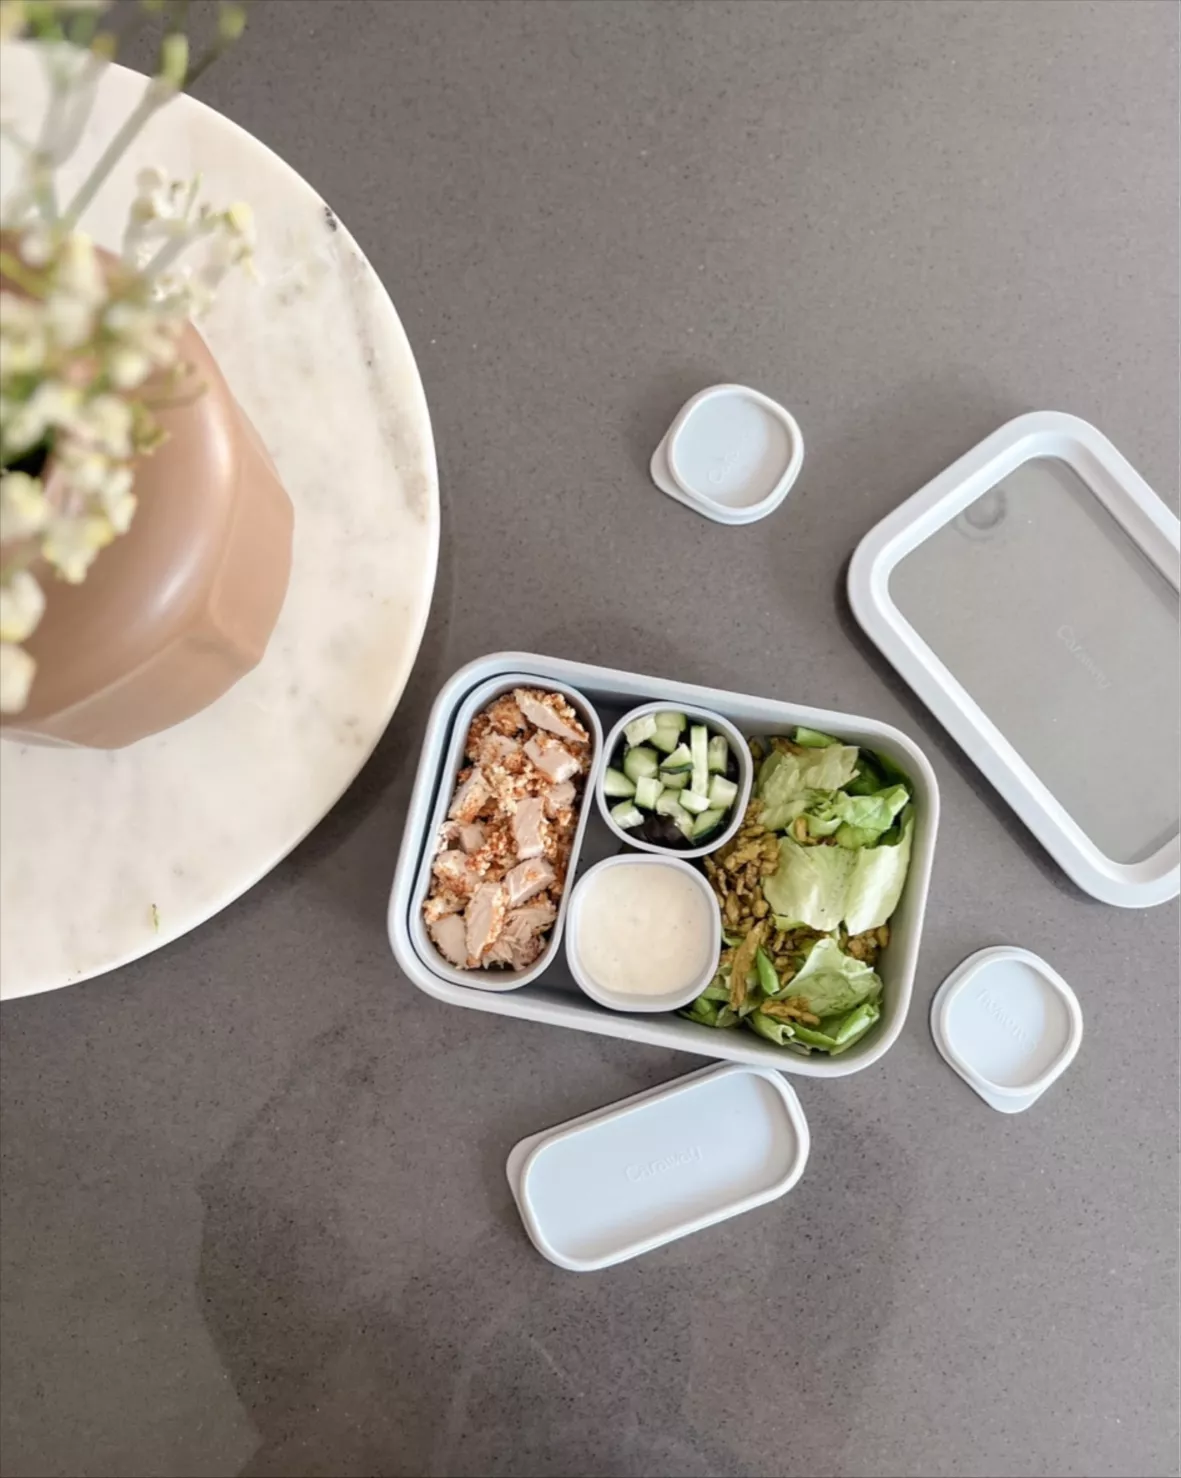 Caraway Food Storage Containers: the Best Way to Meal Prep? 